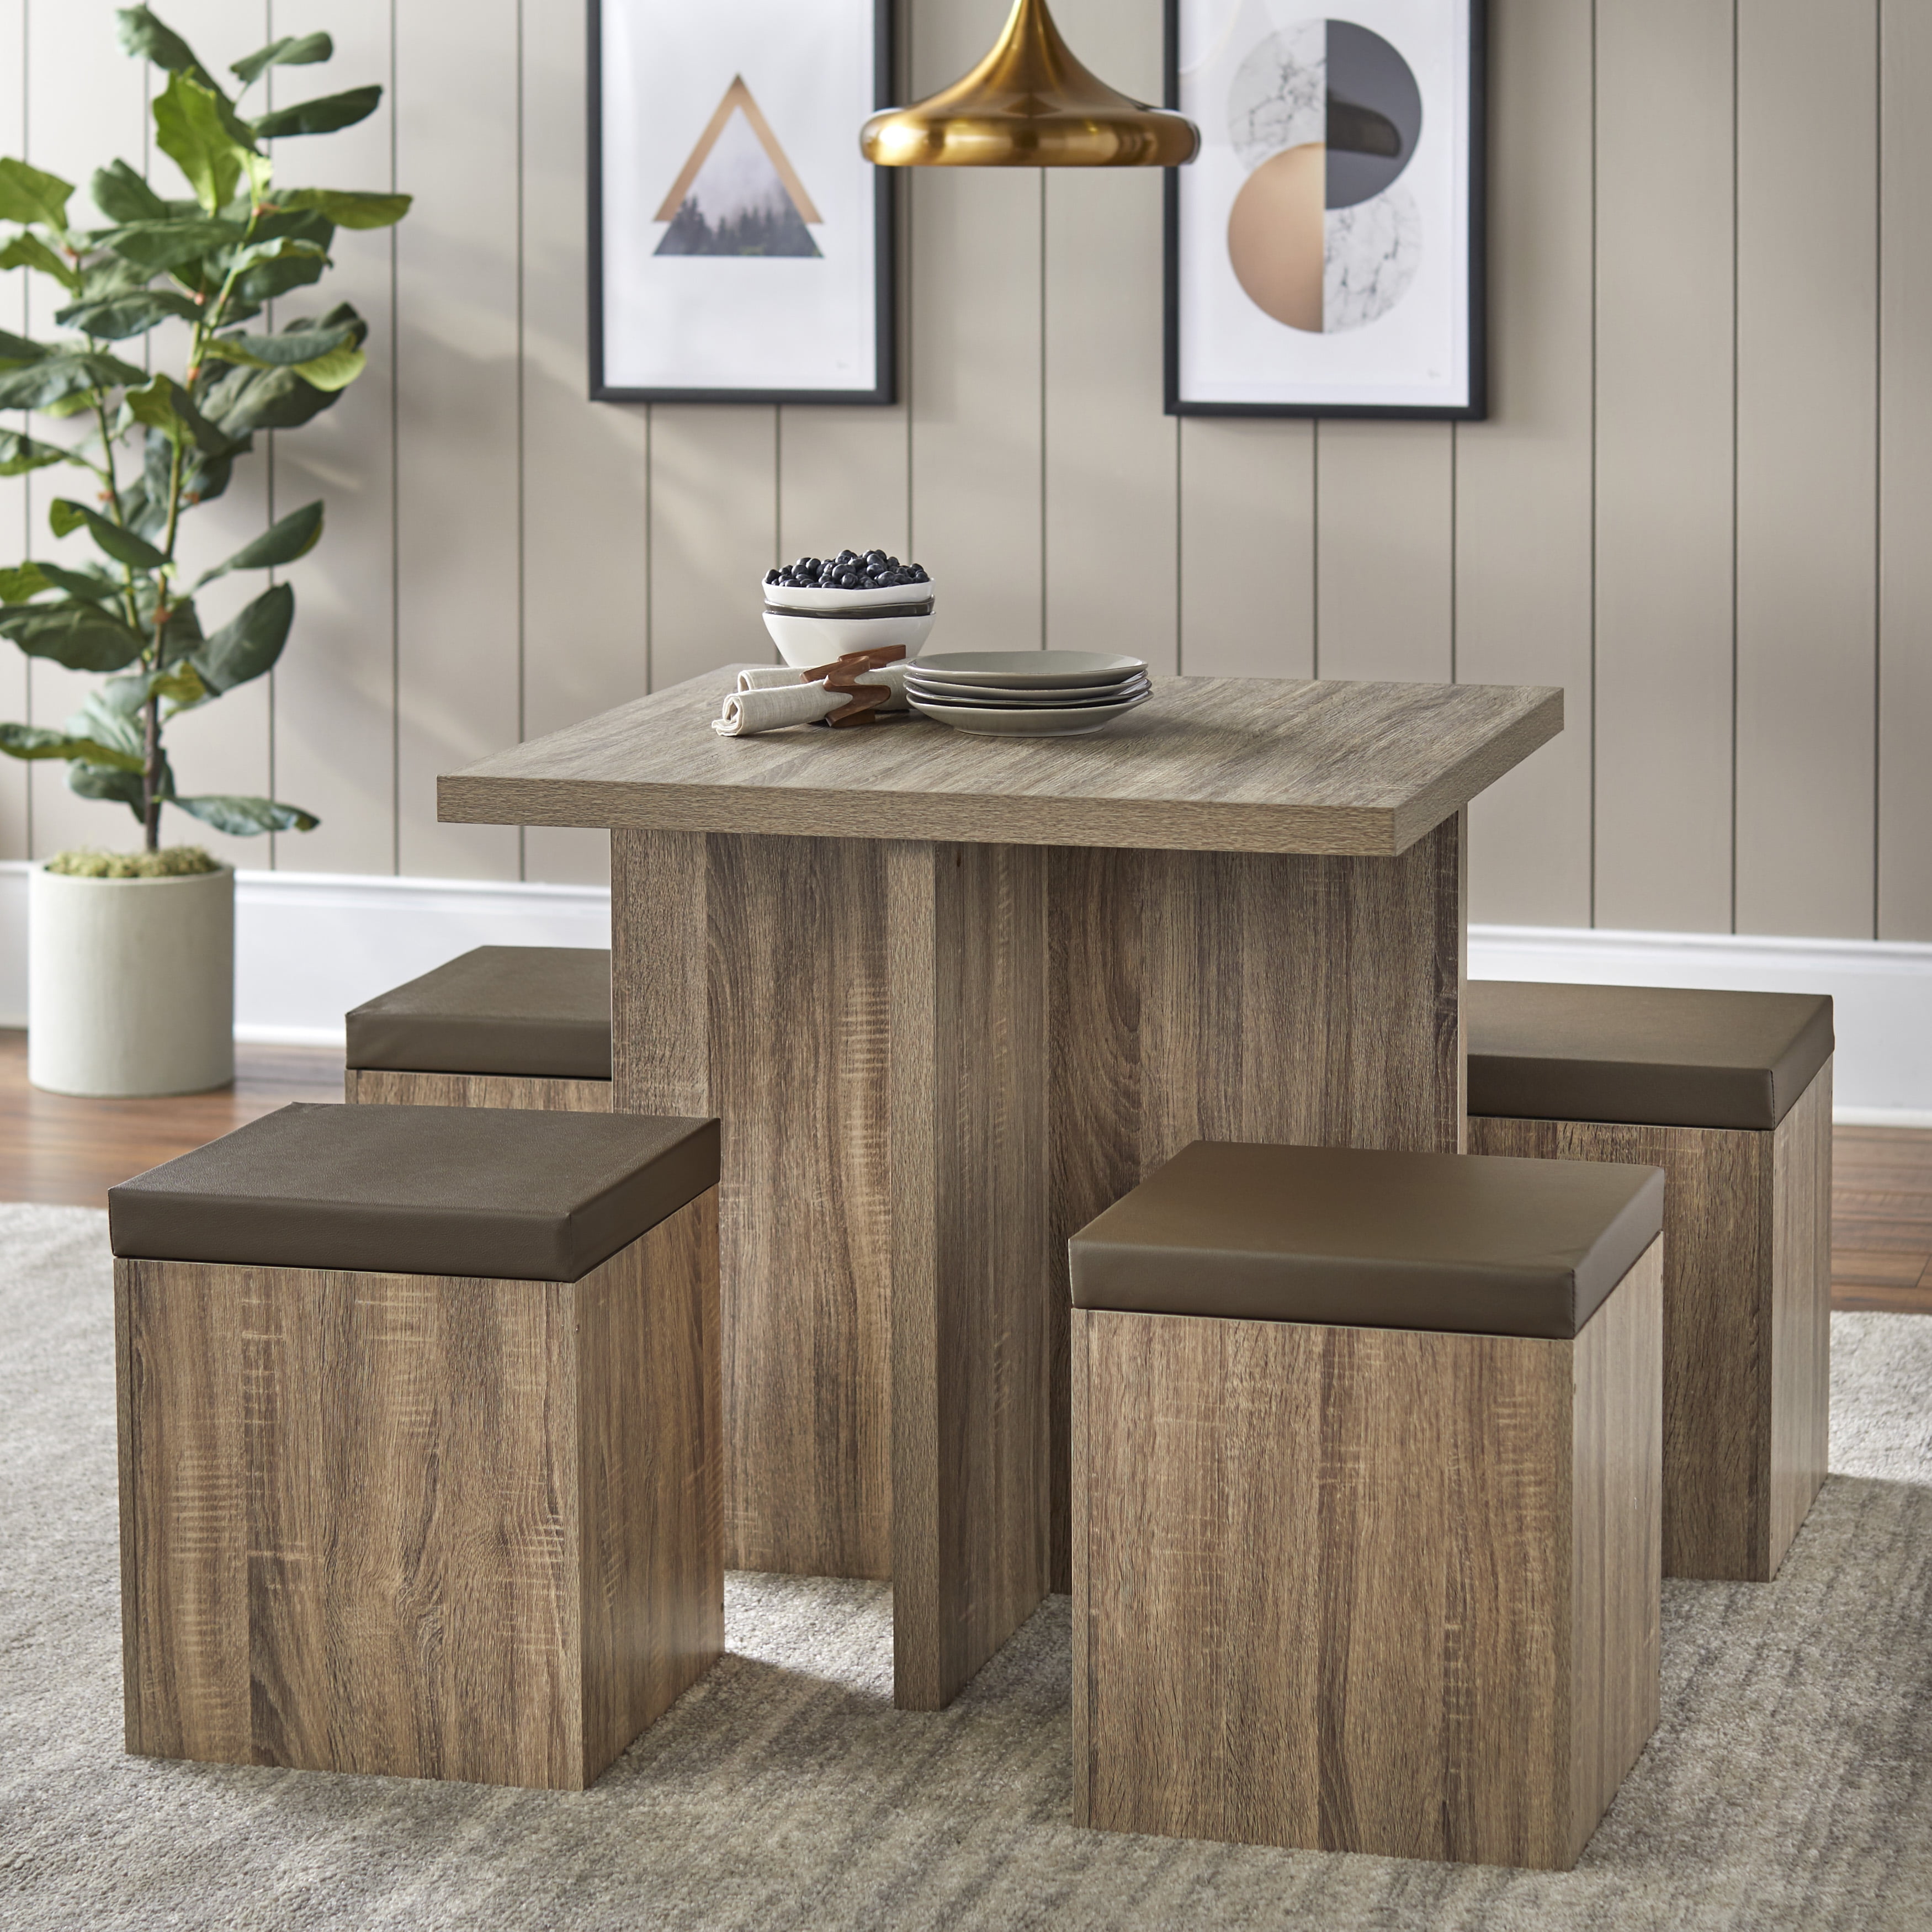 5-Piece Mainstays Dexter Dining Table w/ 4 Storage Ottomans Set (Brown or Gray) $144 + Free Shipping